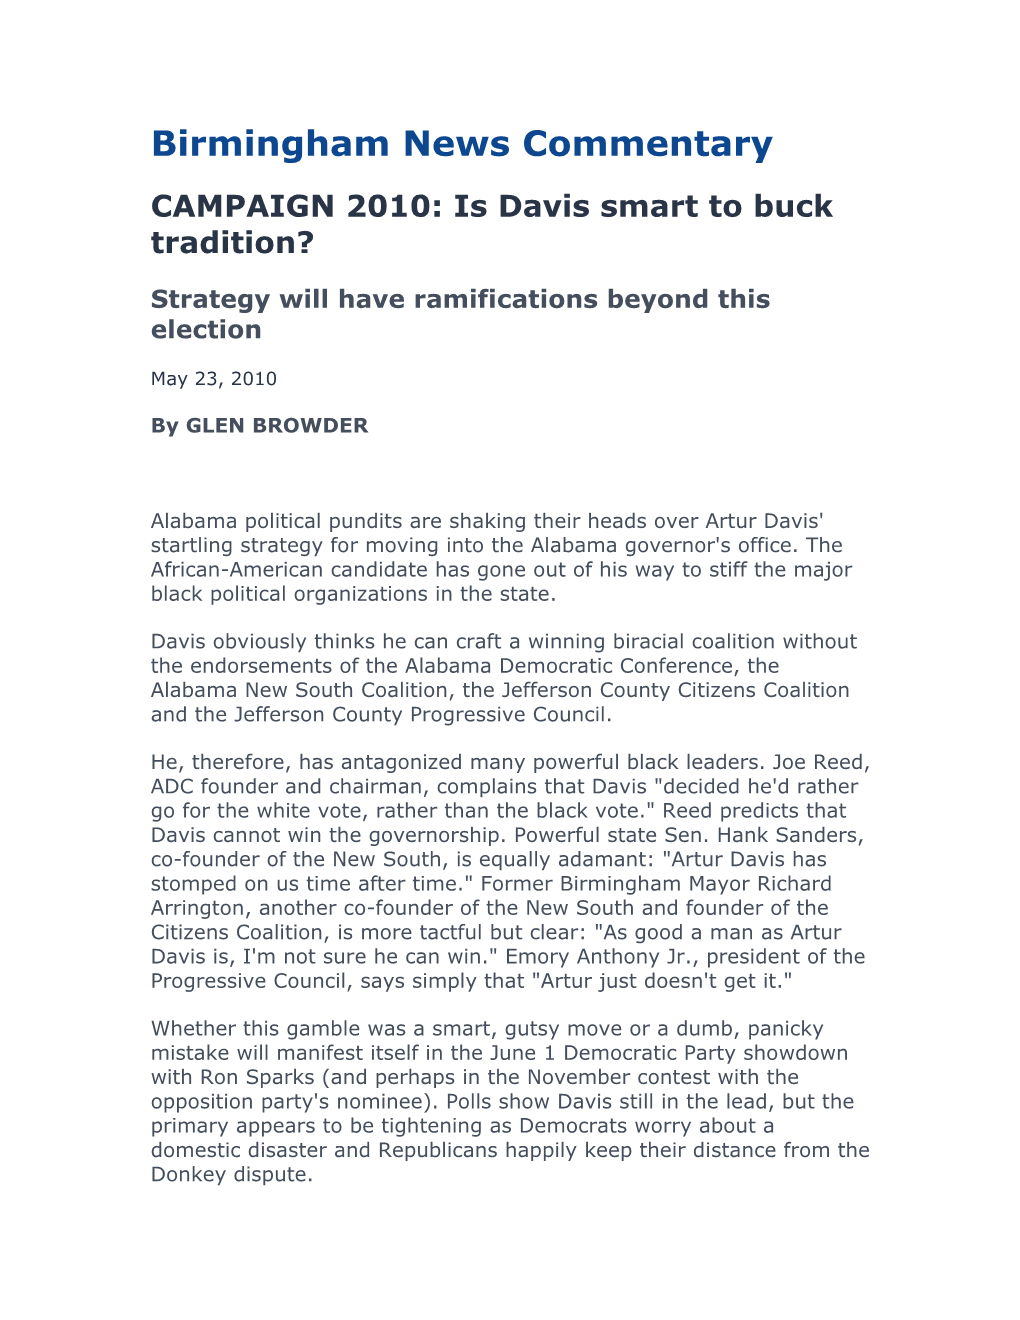 Birmingham News Commentary CAMPAIGN 2010: Is Davis Smart to Buck Tradition?